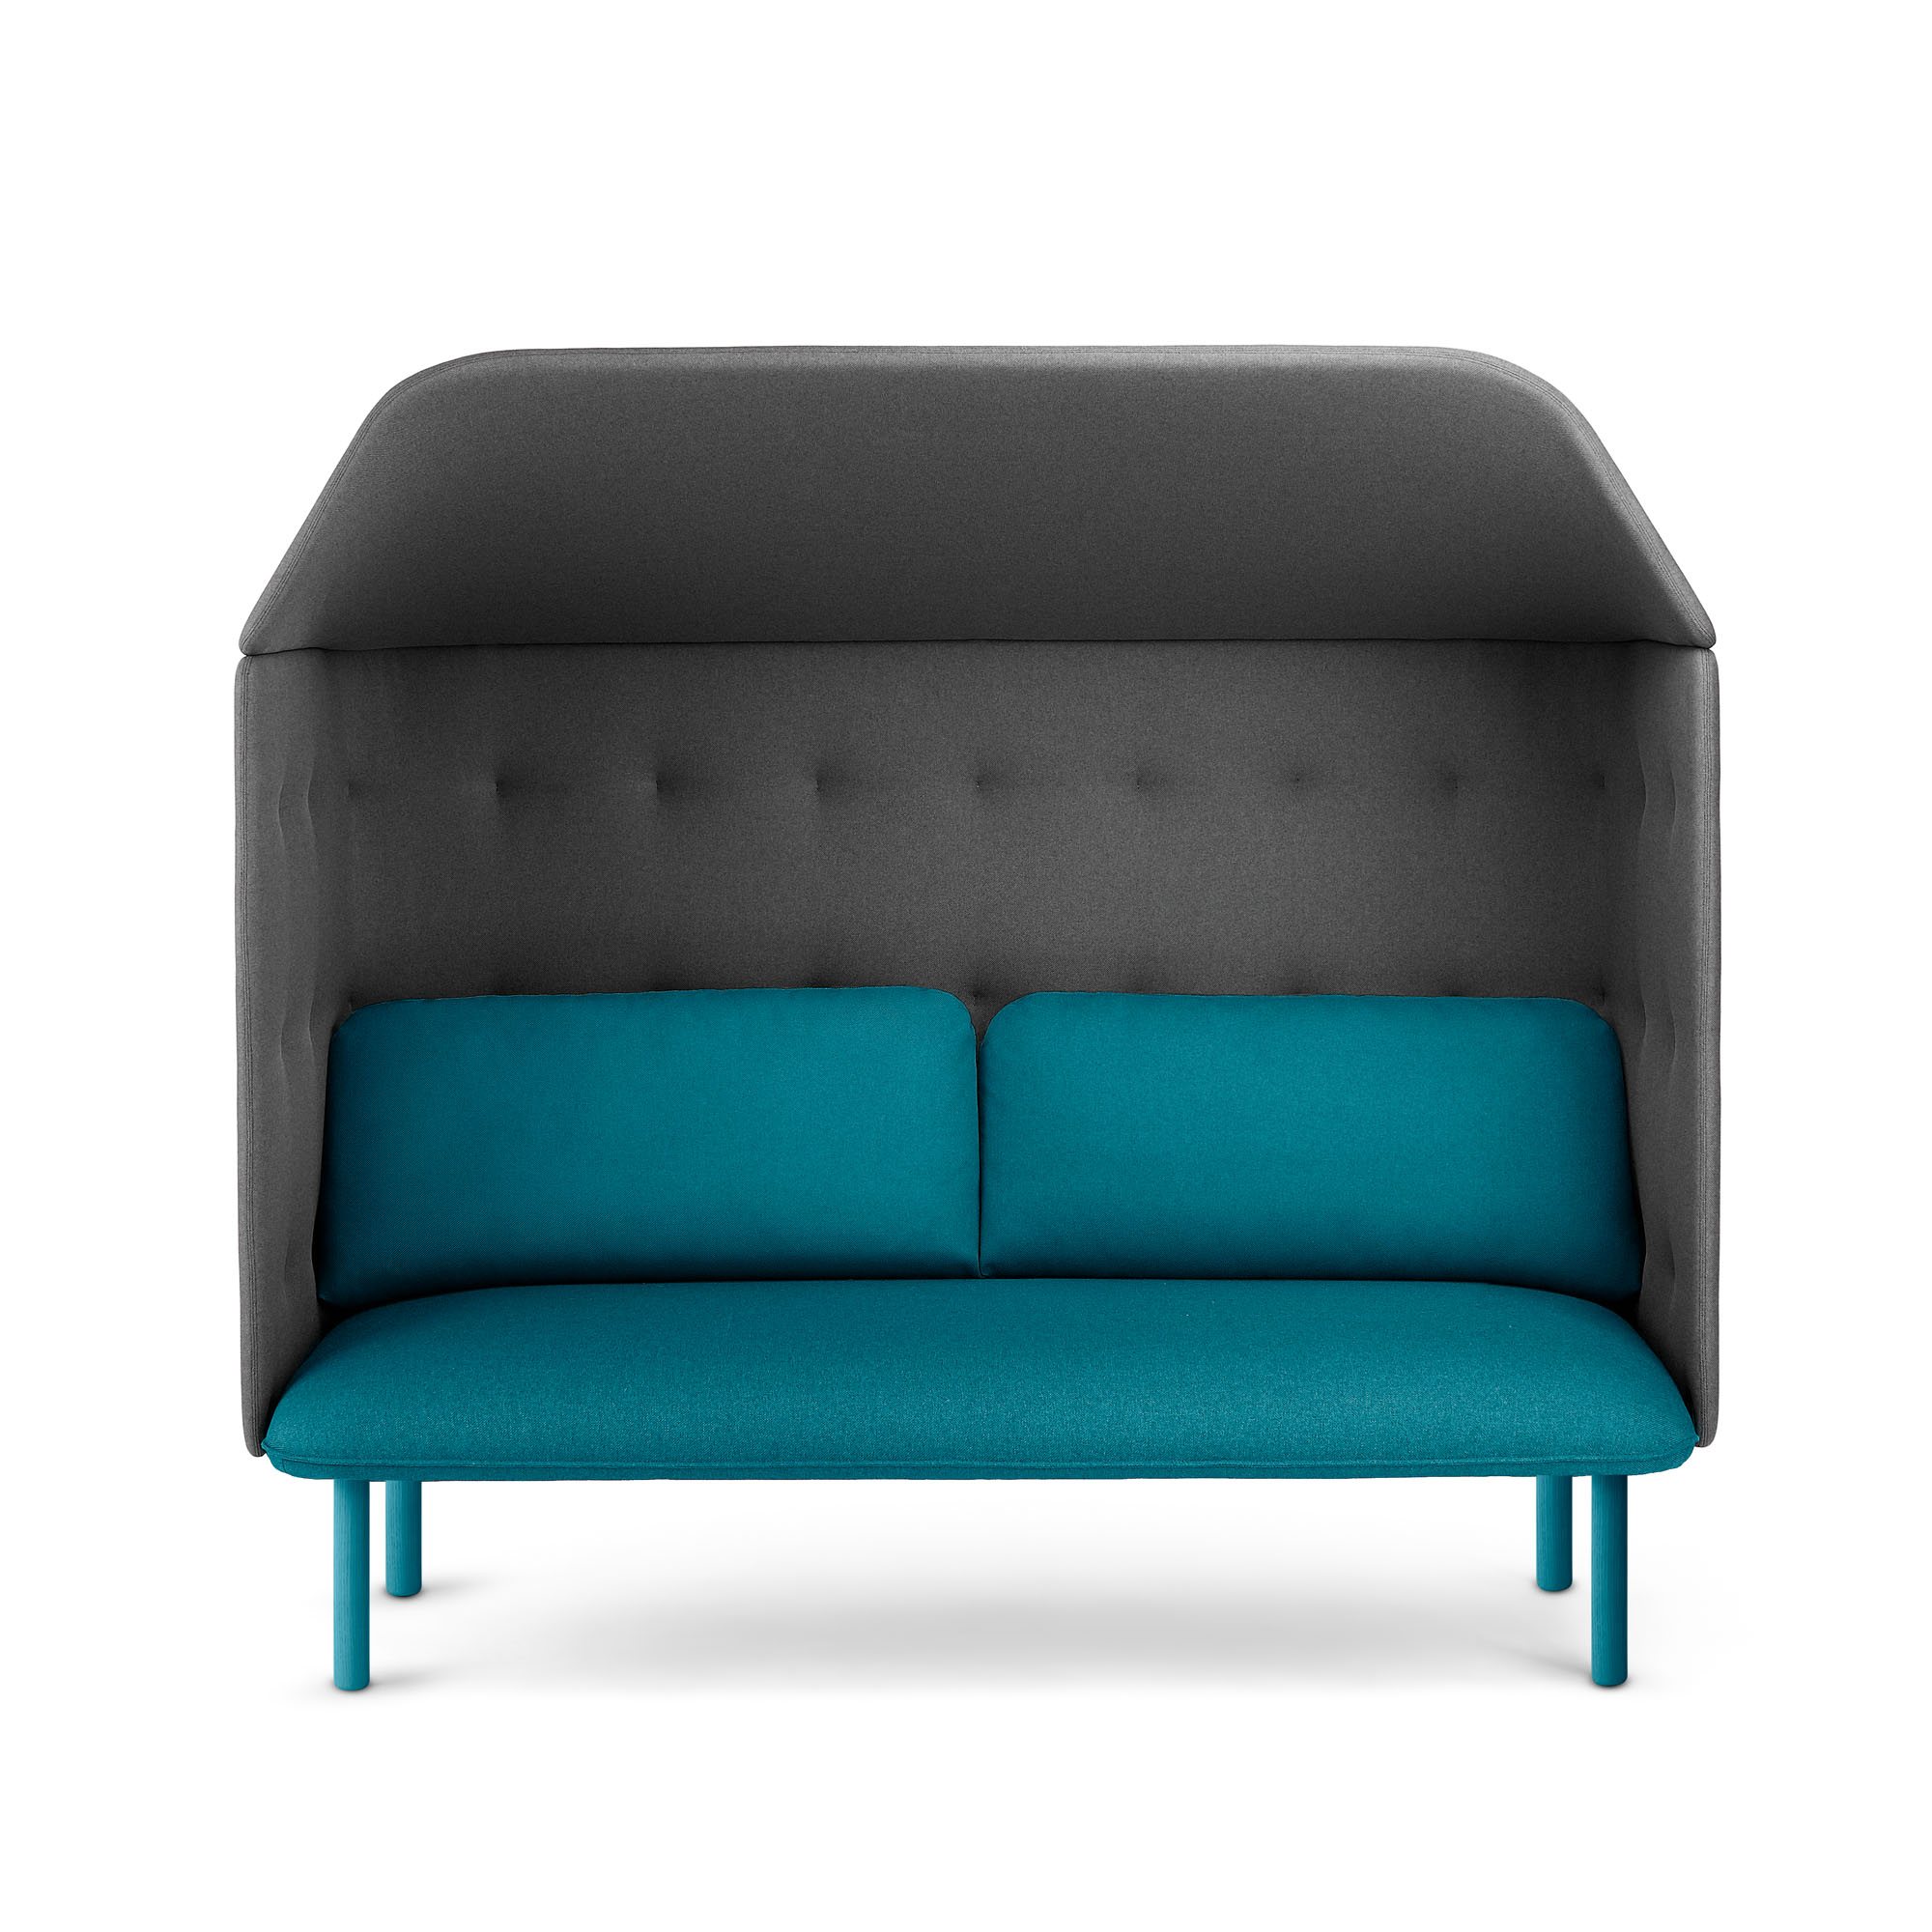 Teal + Dark Gray QT Privacy Lounge Sofa with Canopy,Teal,hi-res